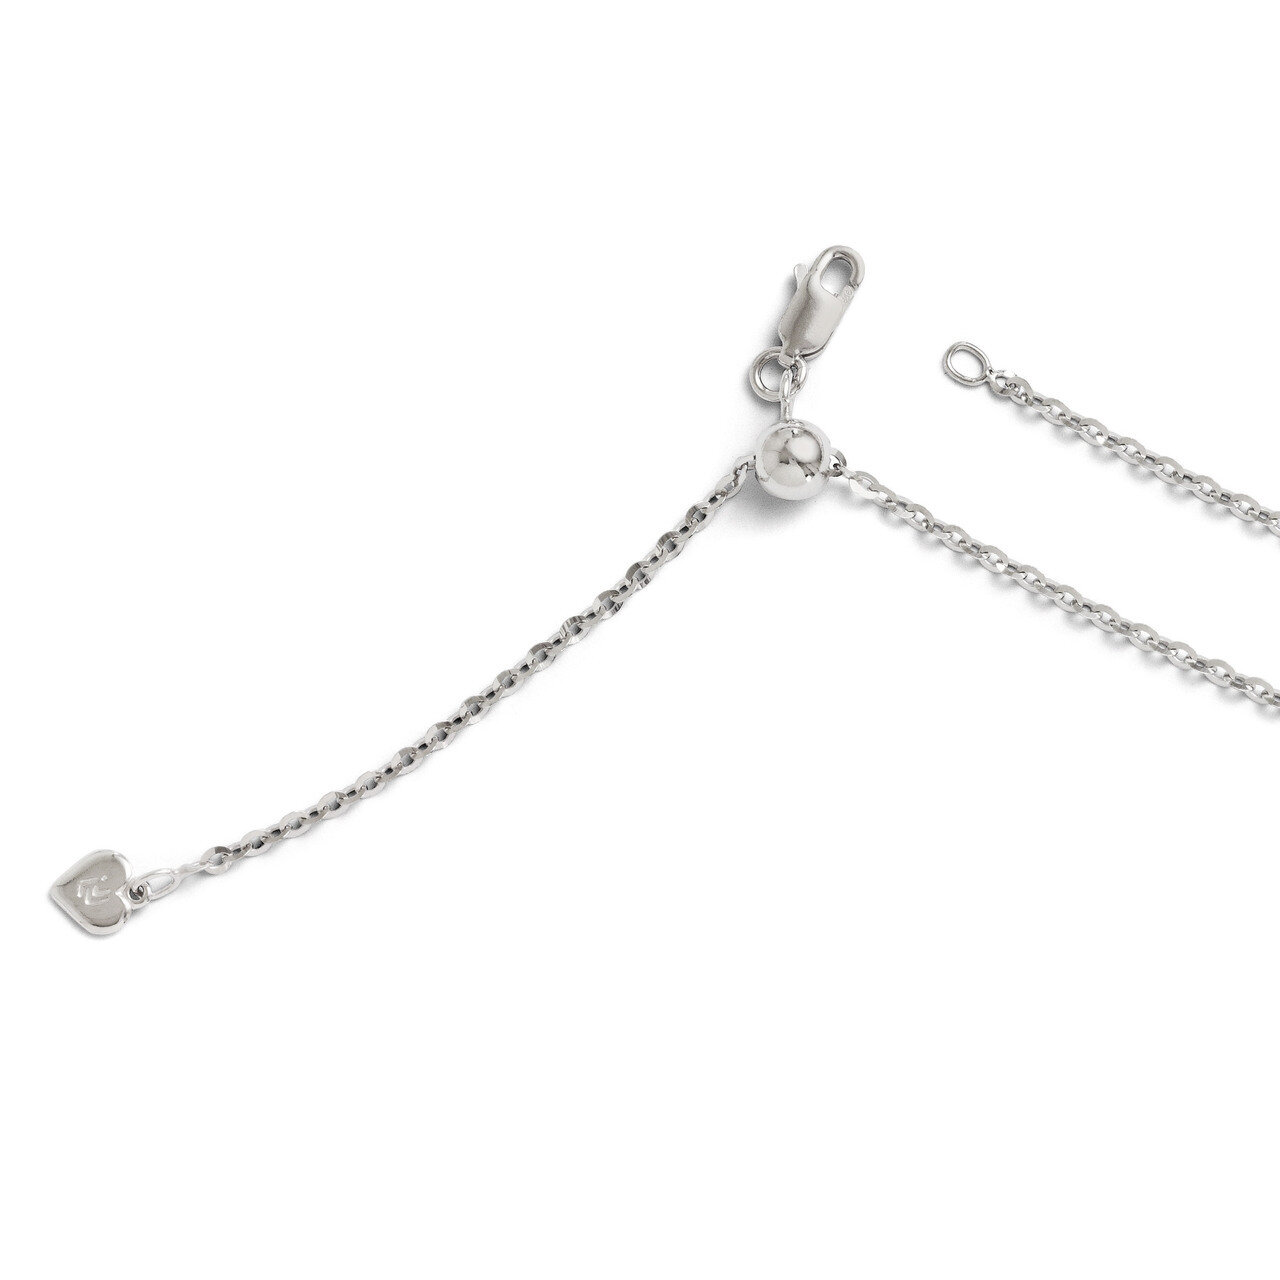 Adjustable Cable Chain 30 Inch - Sterling Silver HB-FC31-30